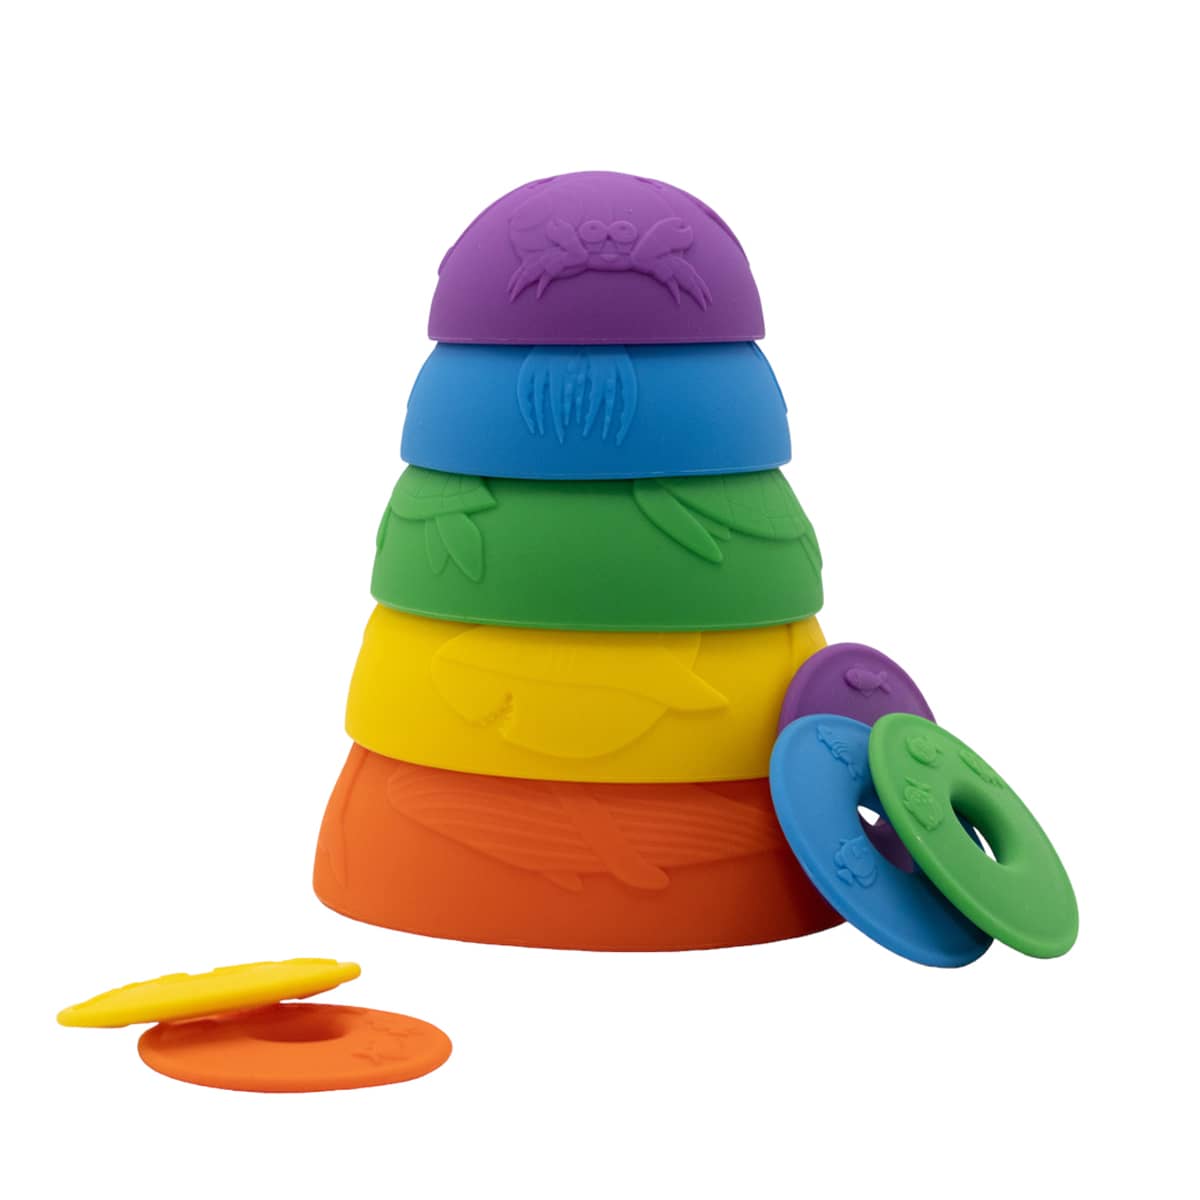 Jellystone Designs Ocean Stacking Cups - Rainbow Bright